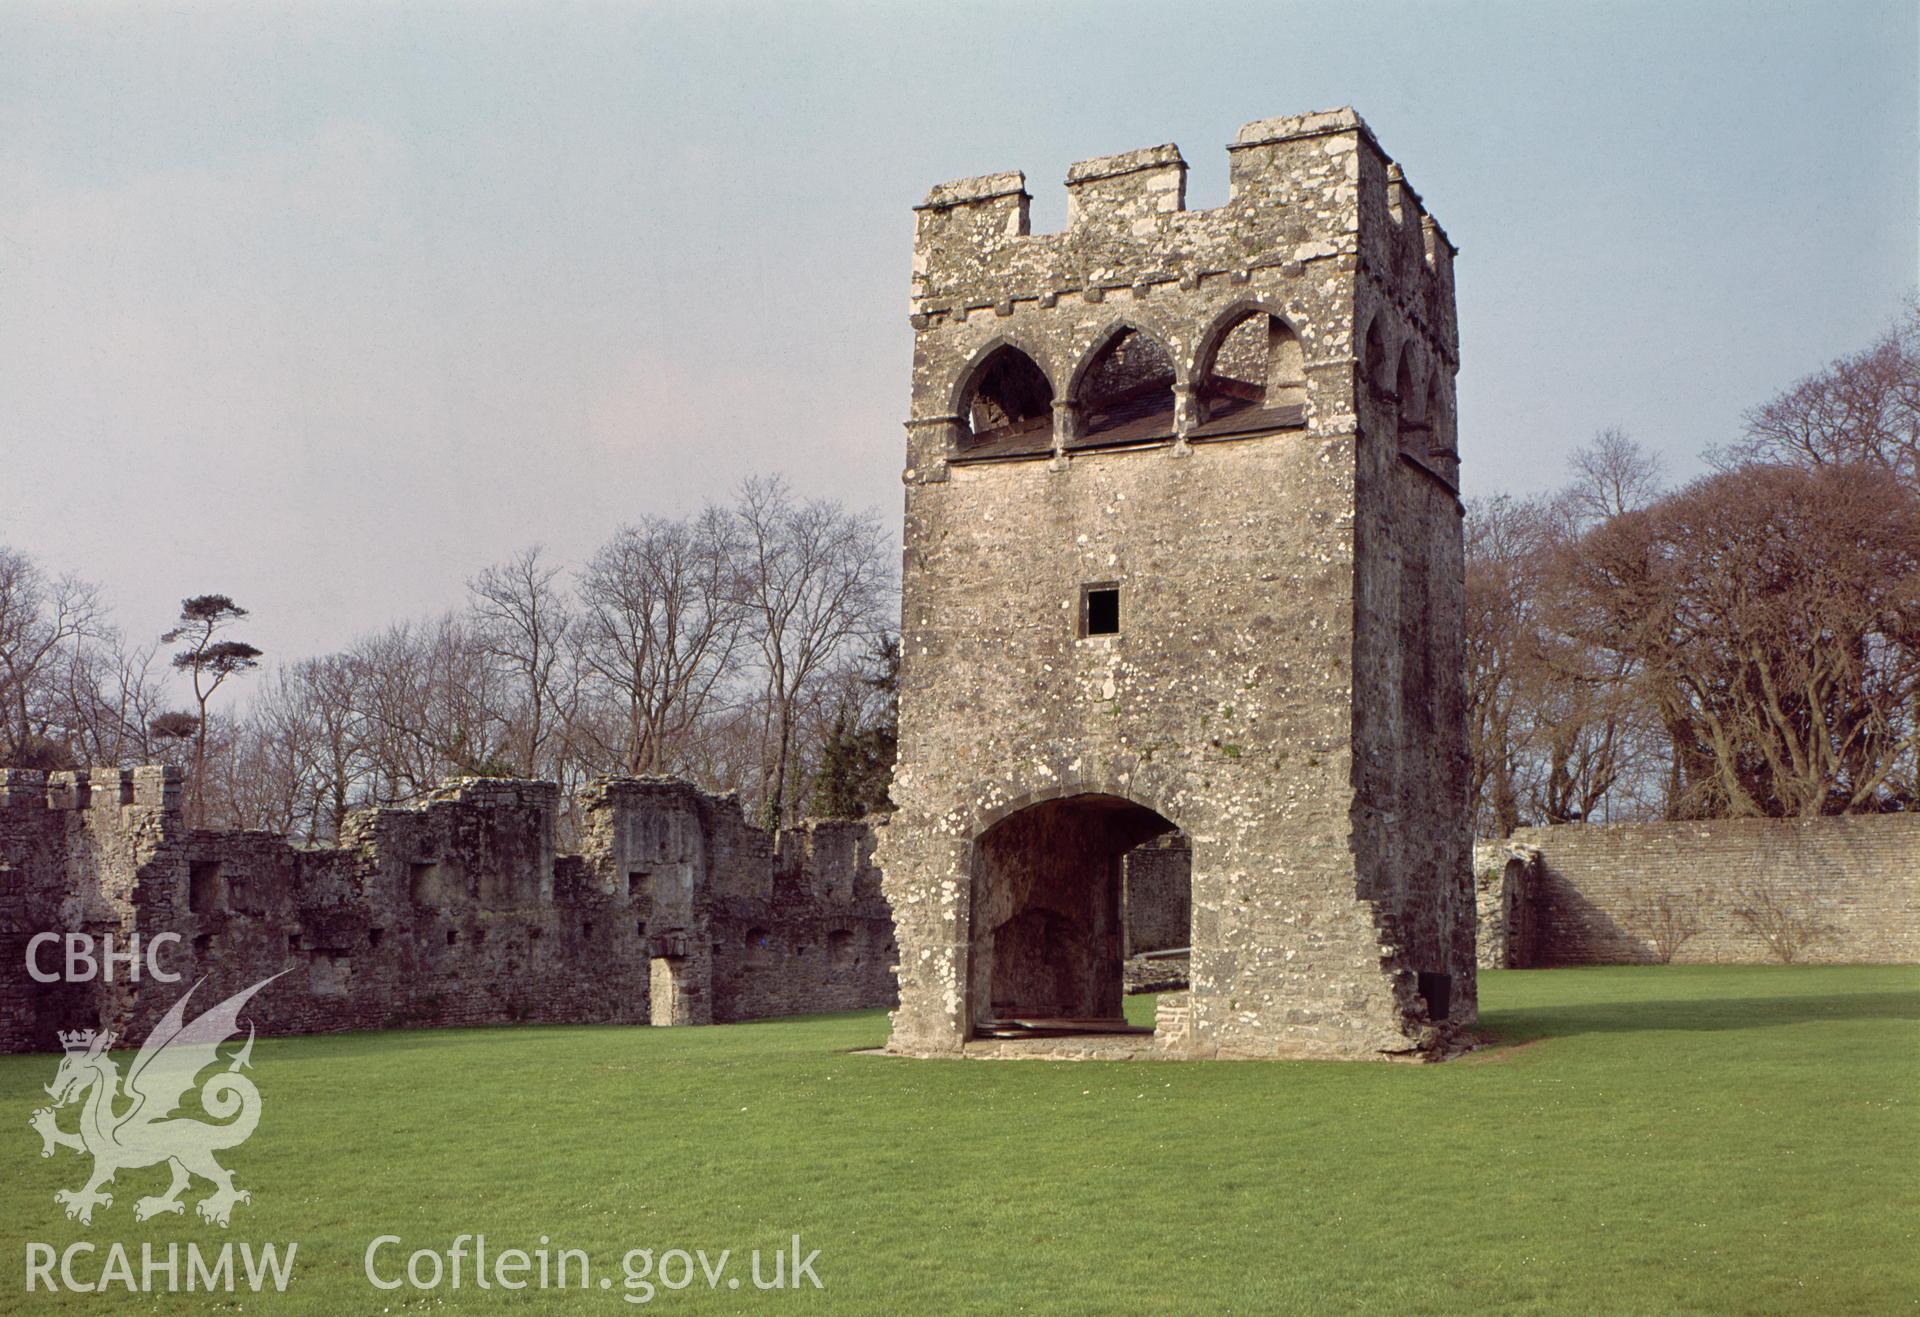 View of the gatehouse at Lamphey Palace taken in 1976.